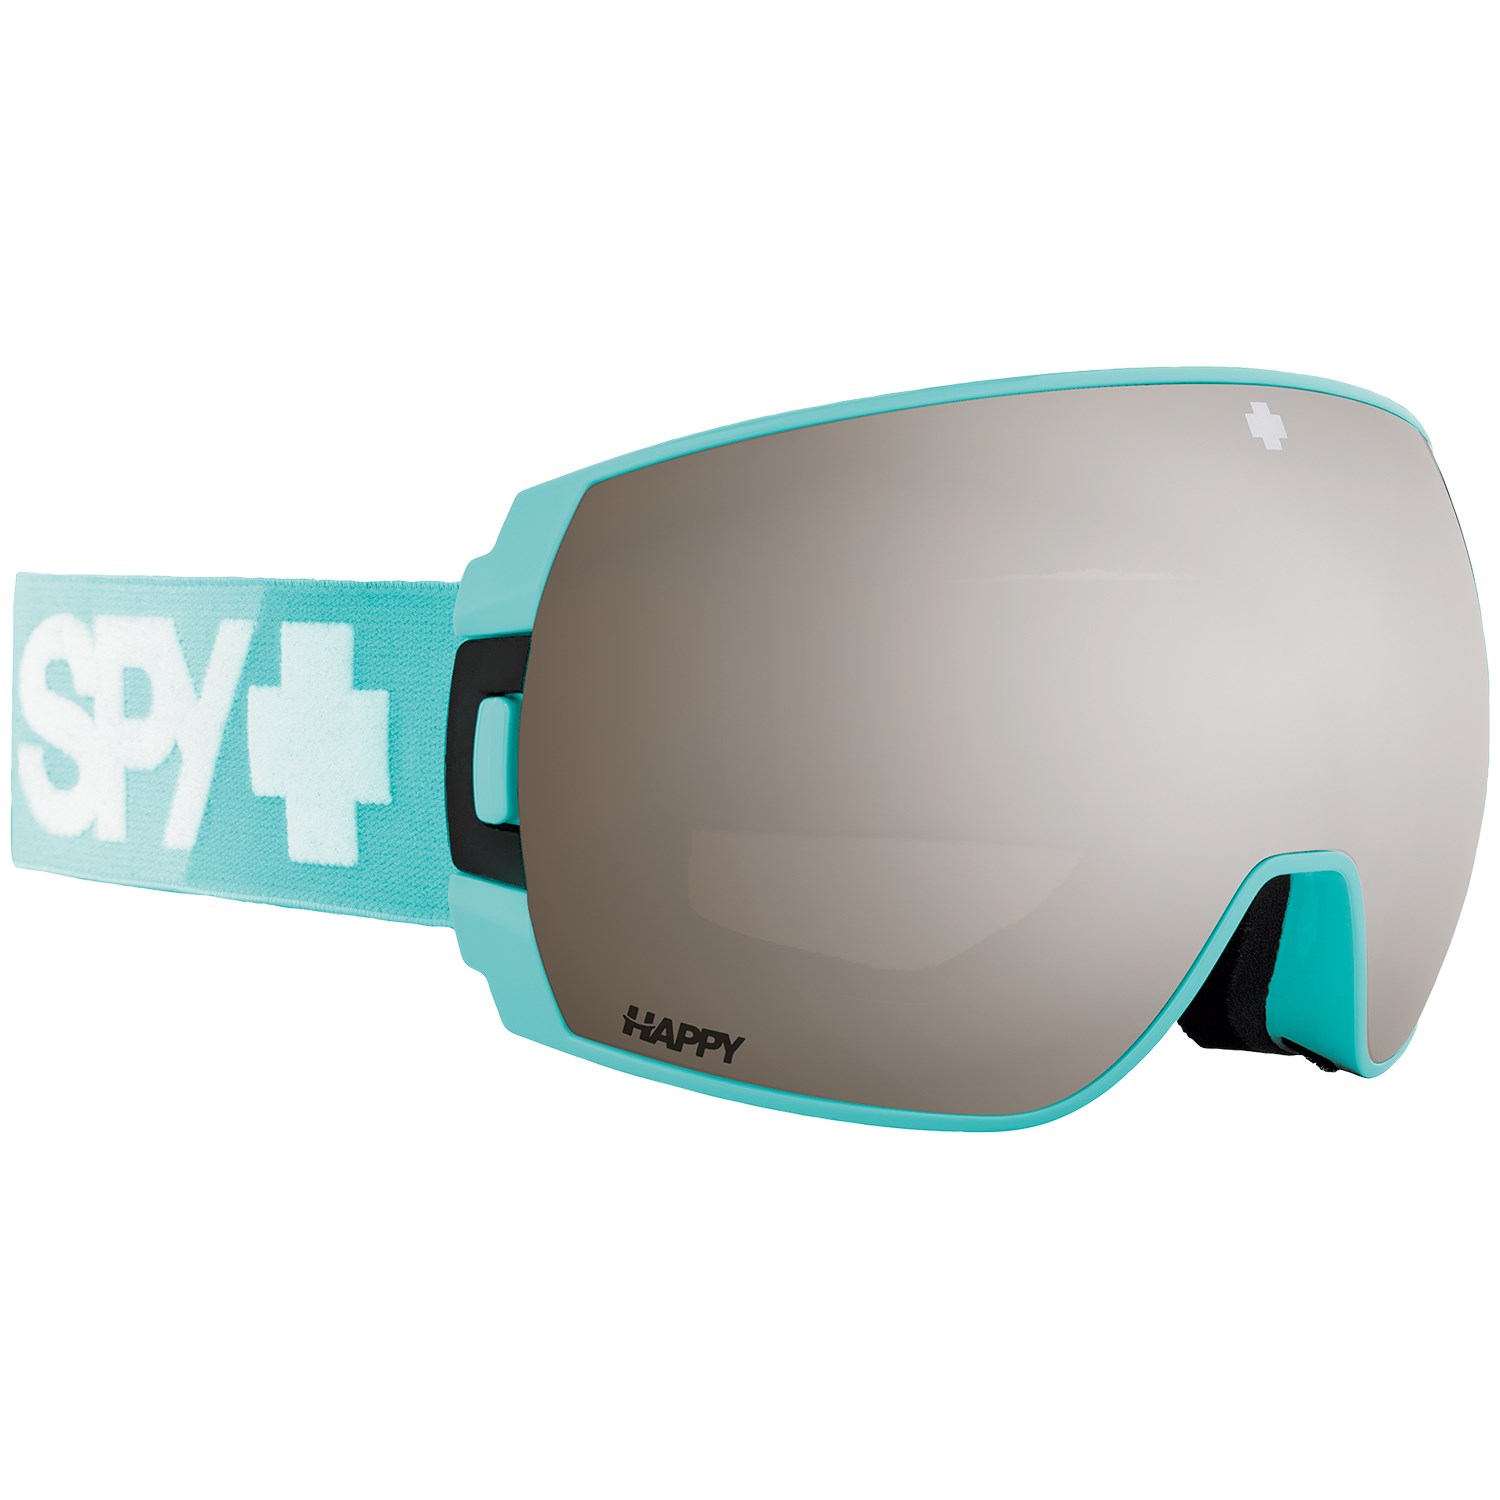 Details about   SPY LEGACY SE NEW 2021 Goggles Arcade Snow Ski Snowboard Gear EXPRESS SHIPPING